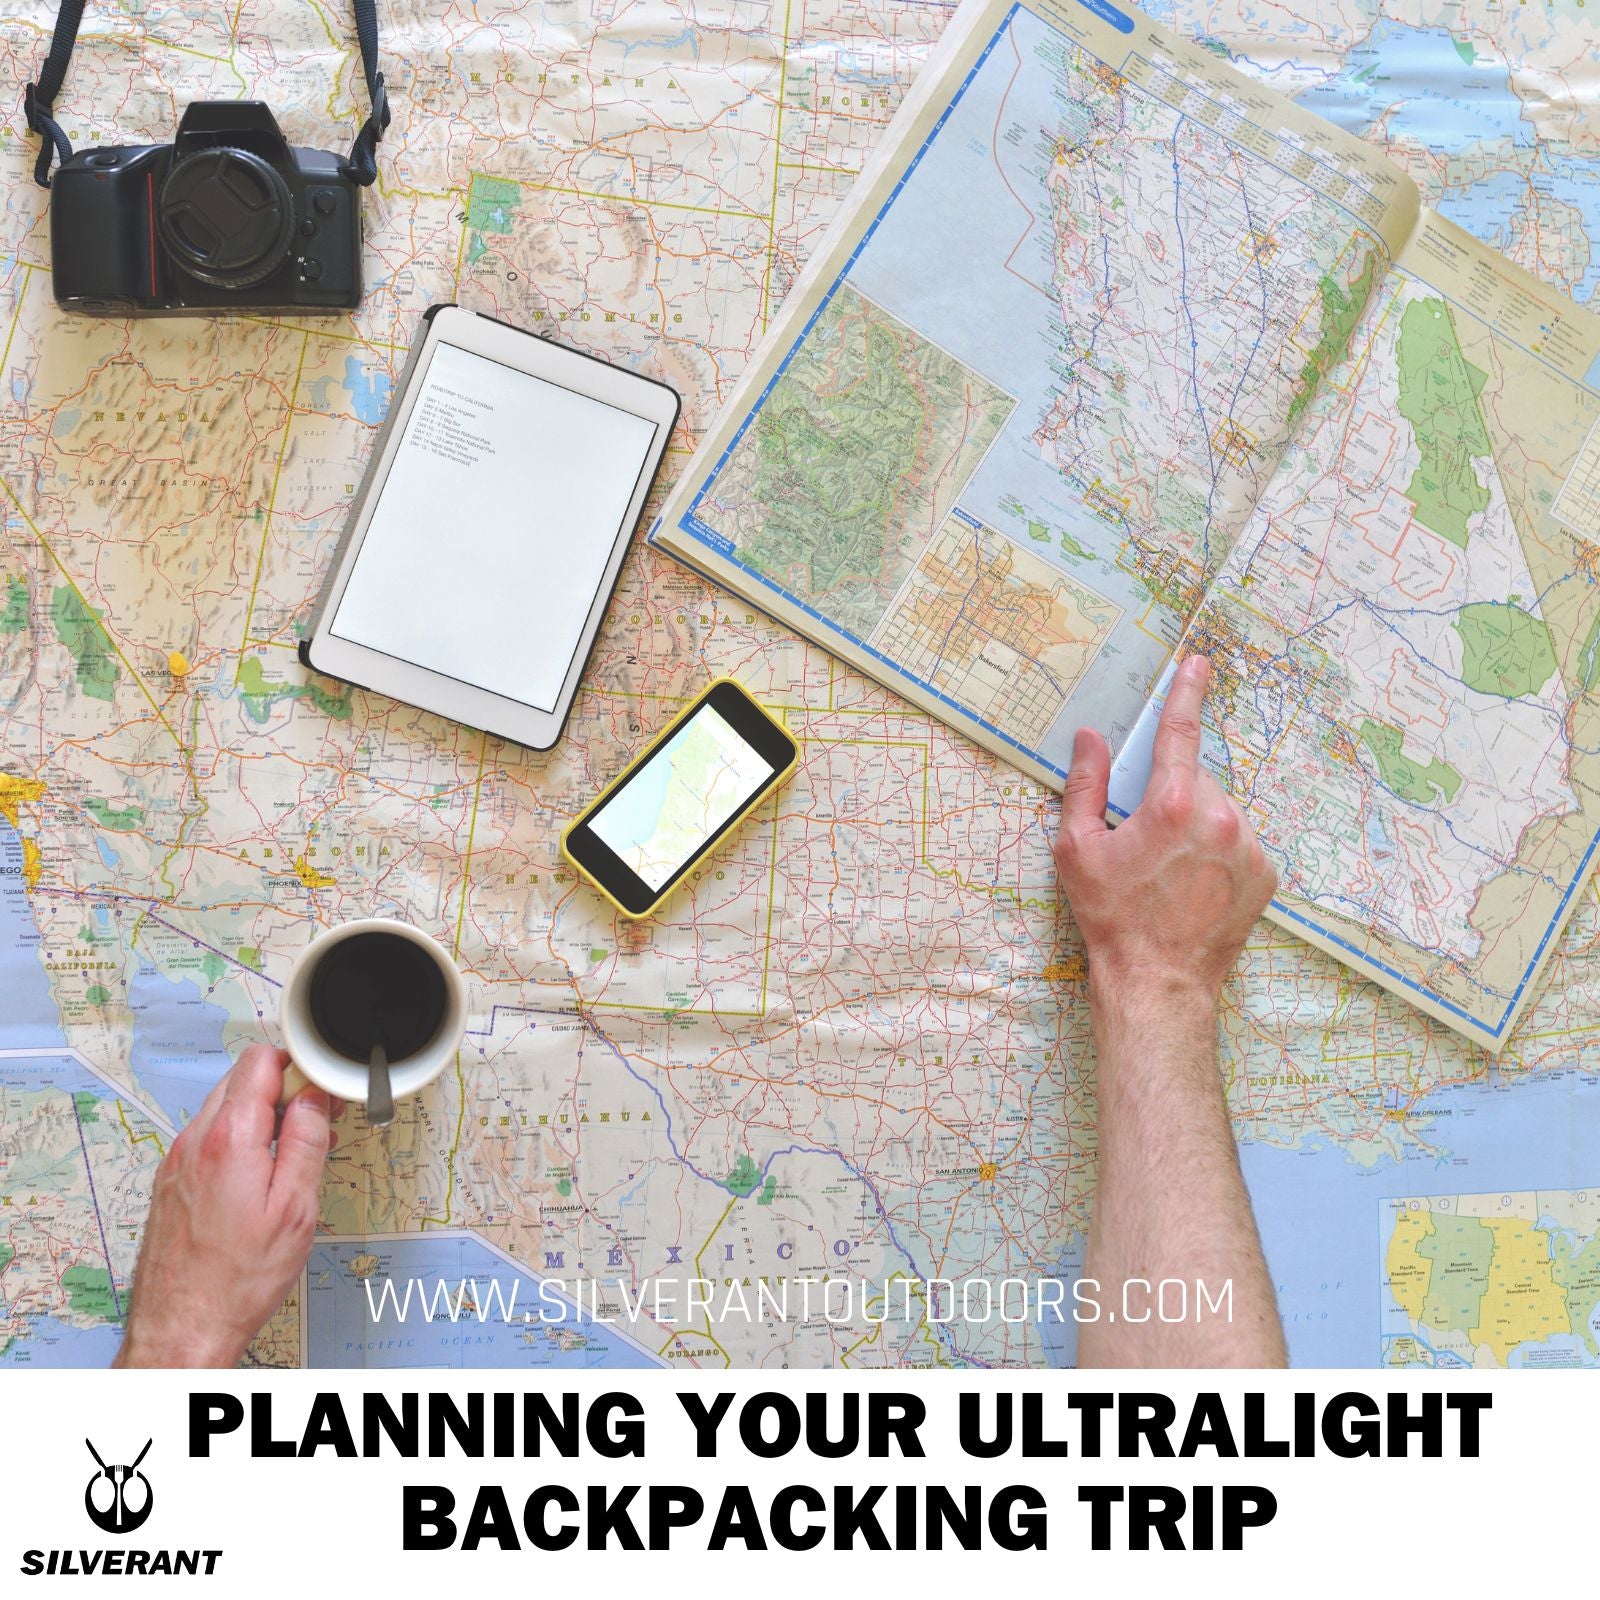 Planning Your Ultralight Backpacking Trip